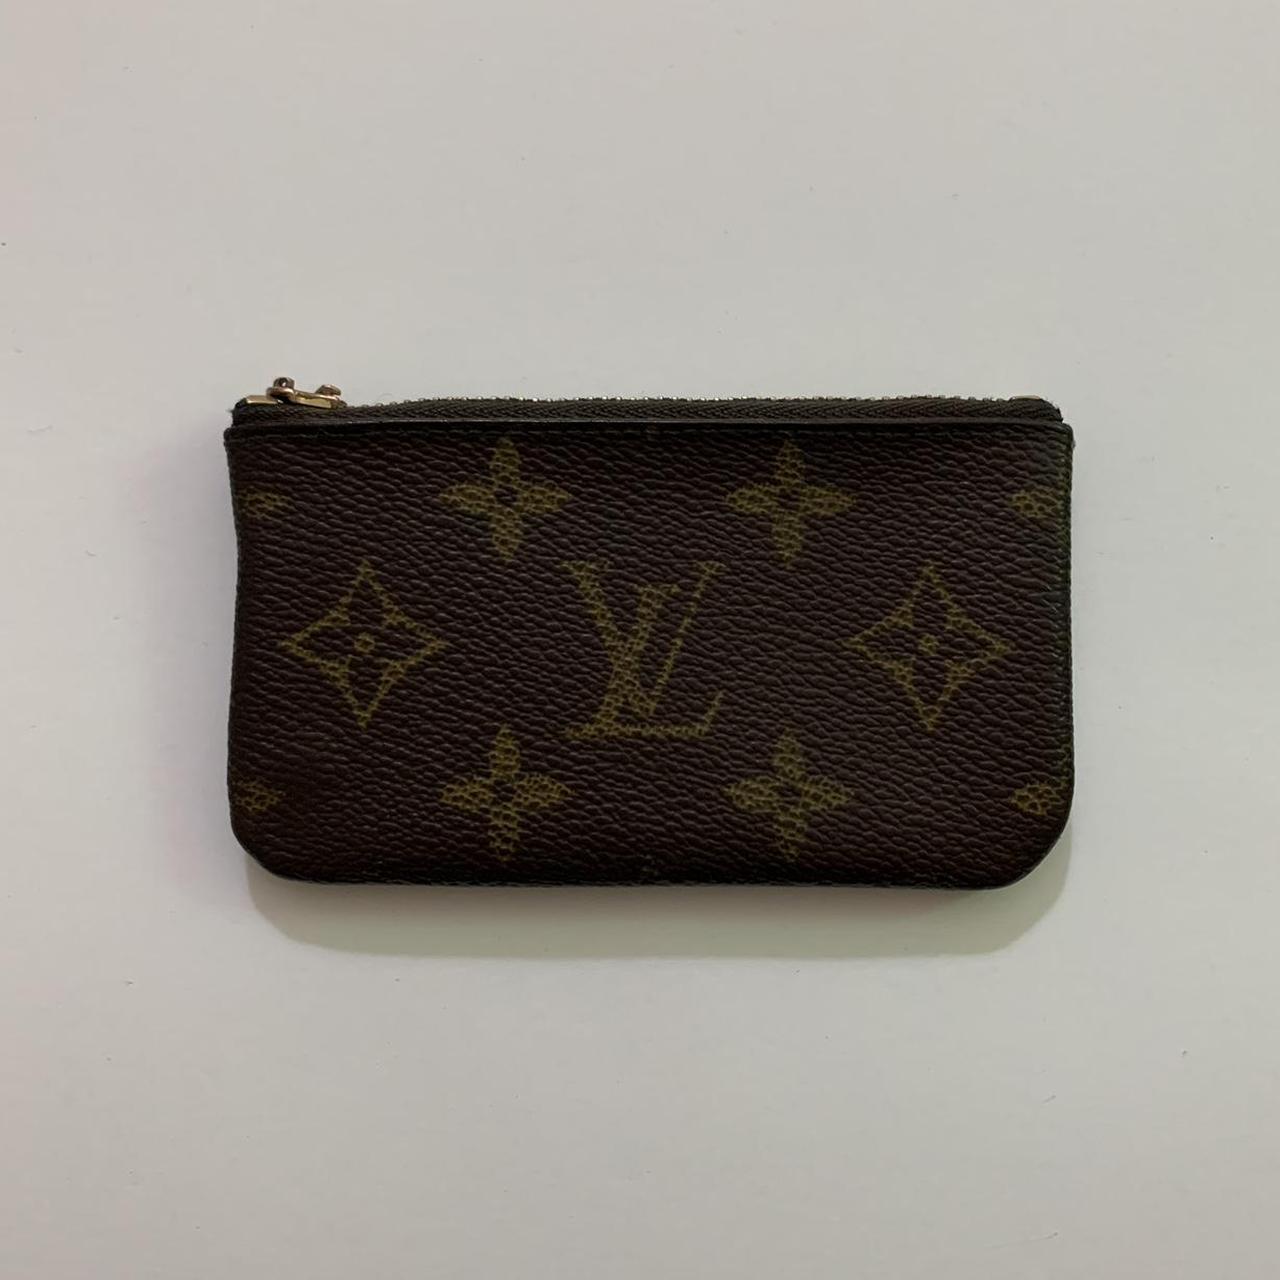 Louis Vuitton Brown Key Pouch! Used like 2 times!  - Depop